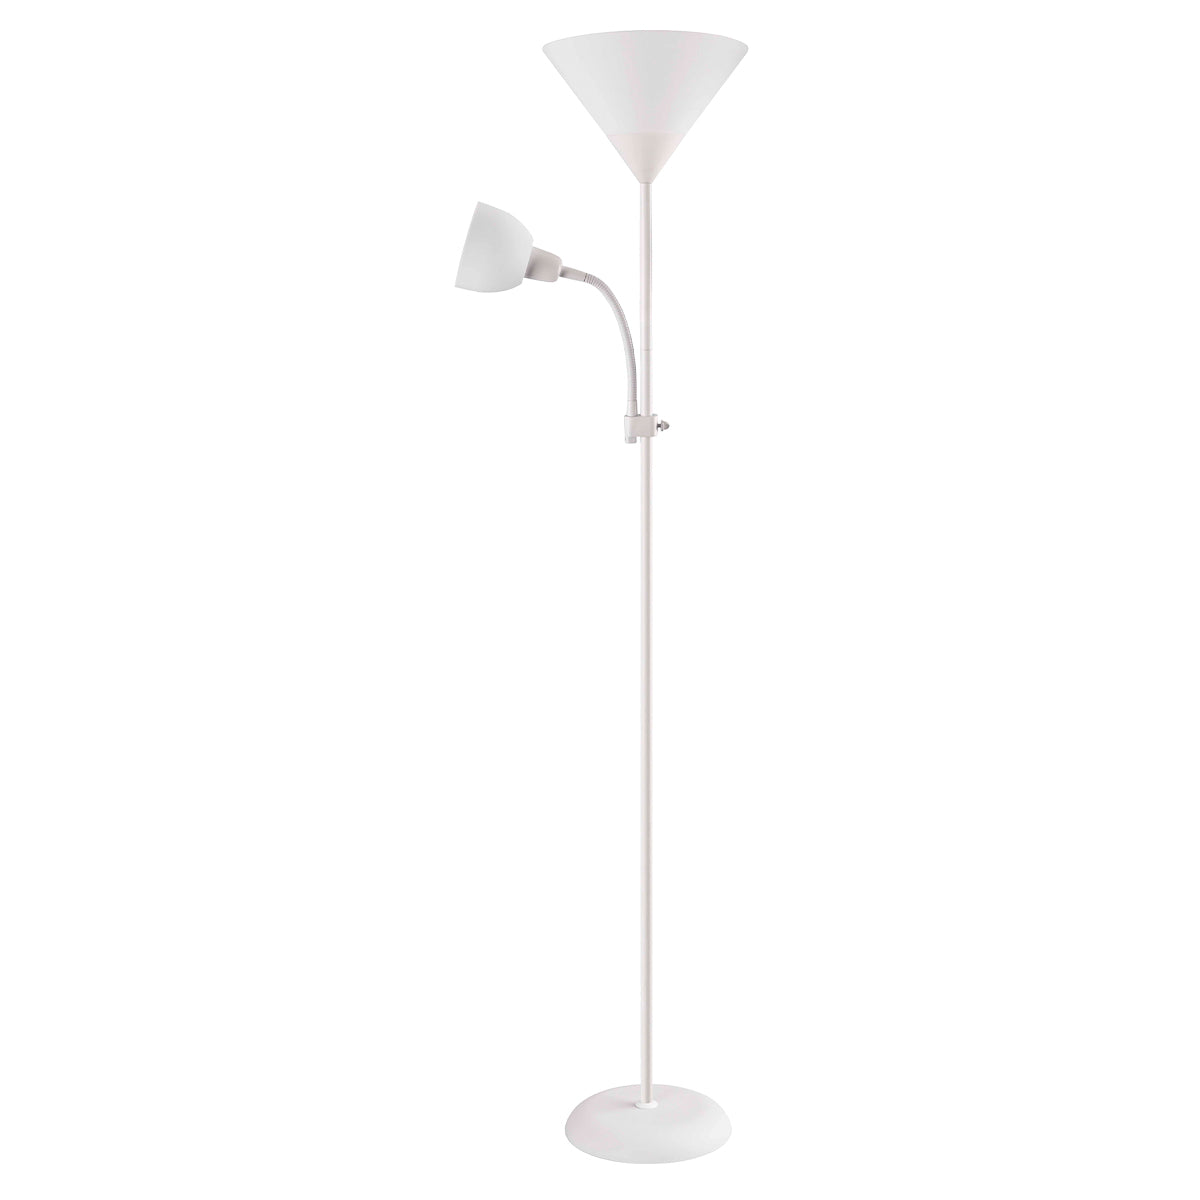 Georgia Mother and Child Floor Lamp - White